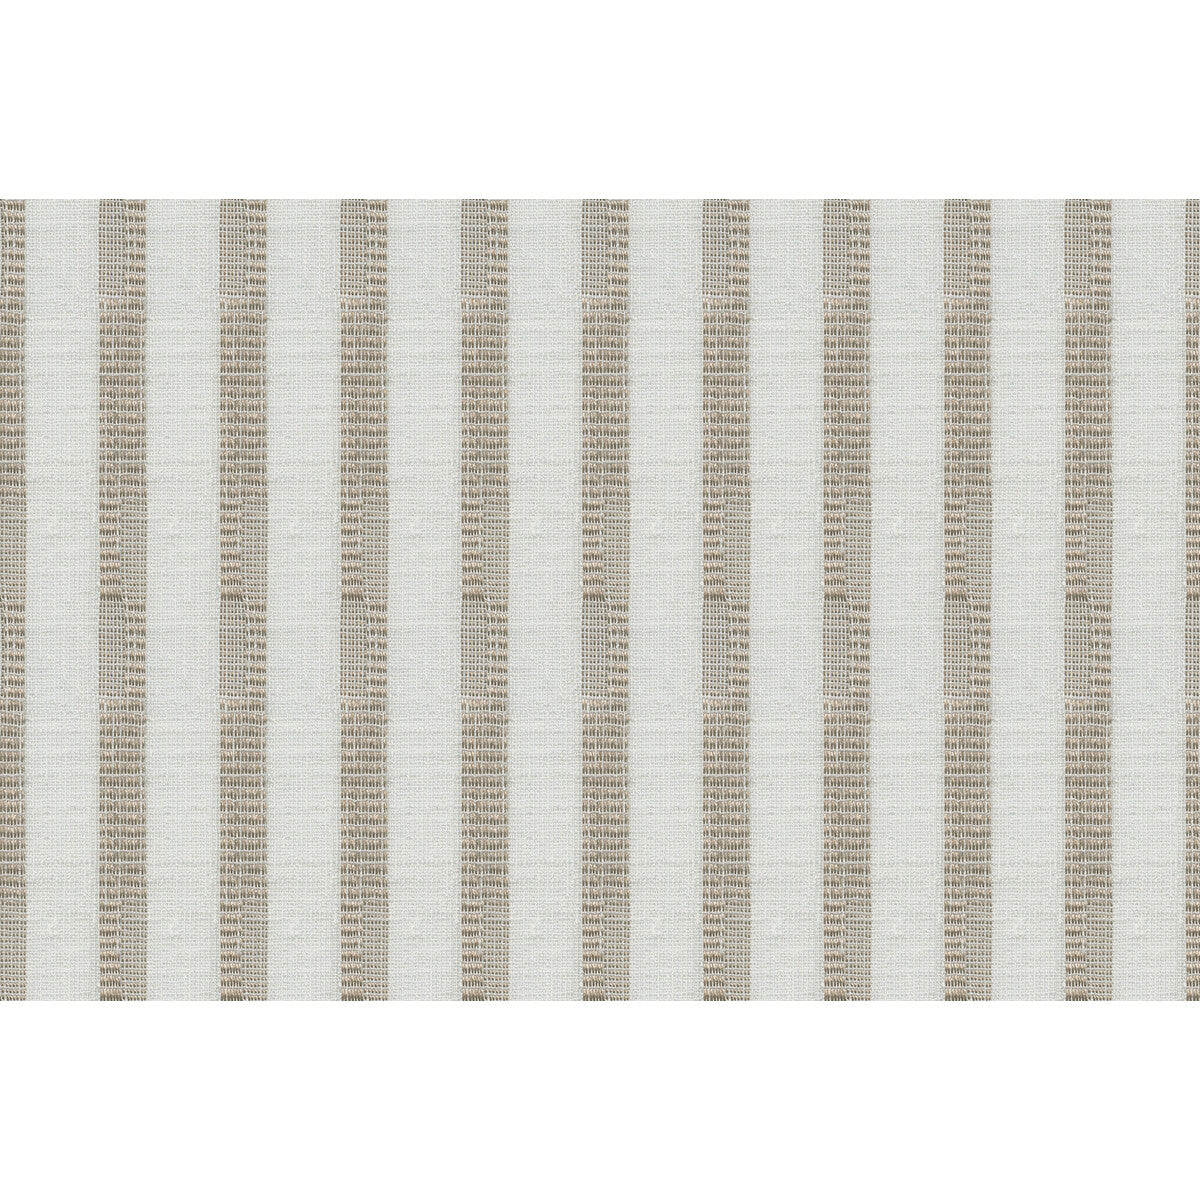 Kravet Contract fabric in 4525-106 color - pattern 4525.106.0 - by Kravet Contract